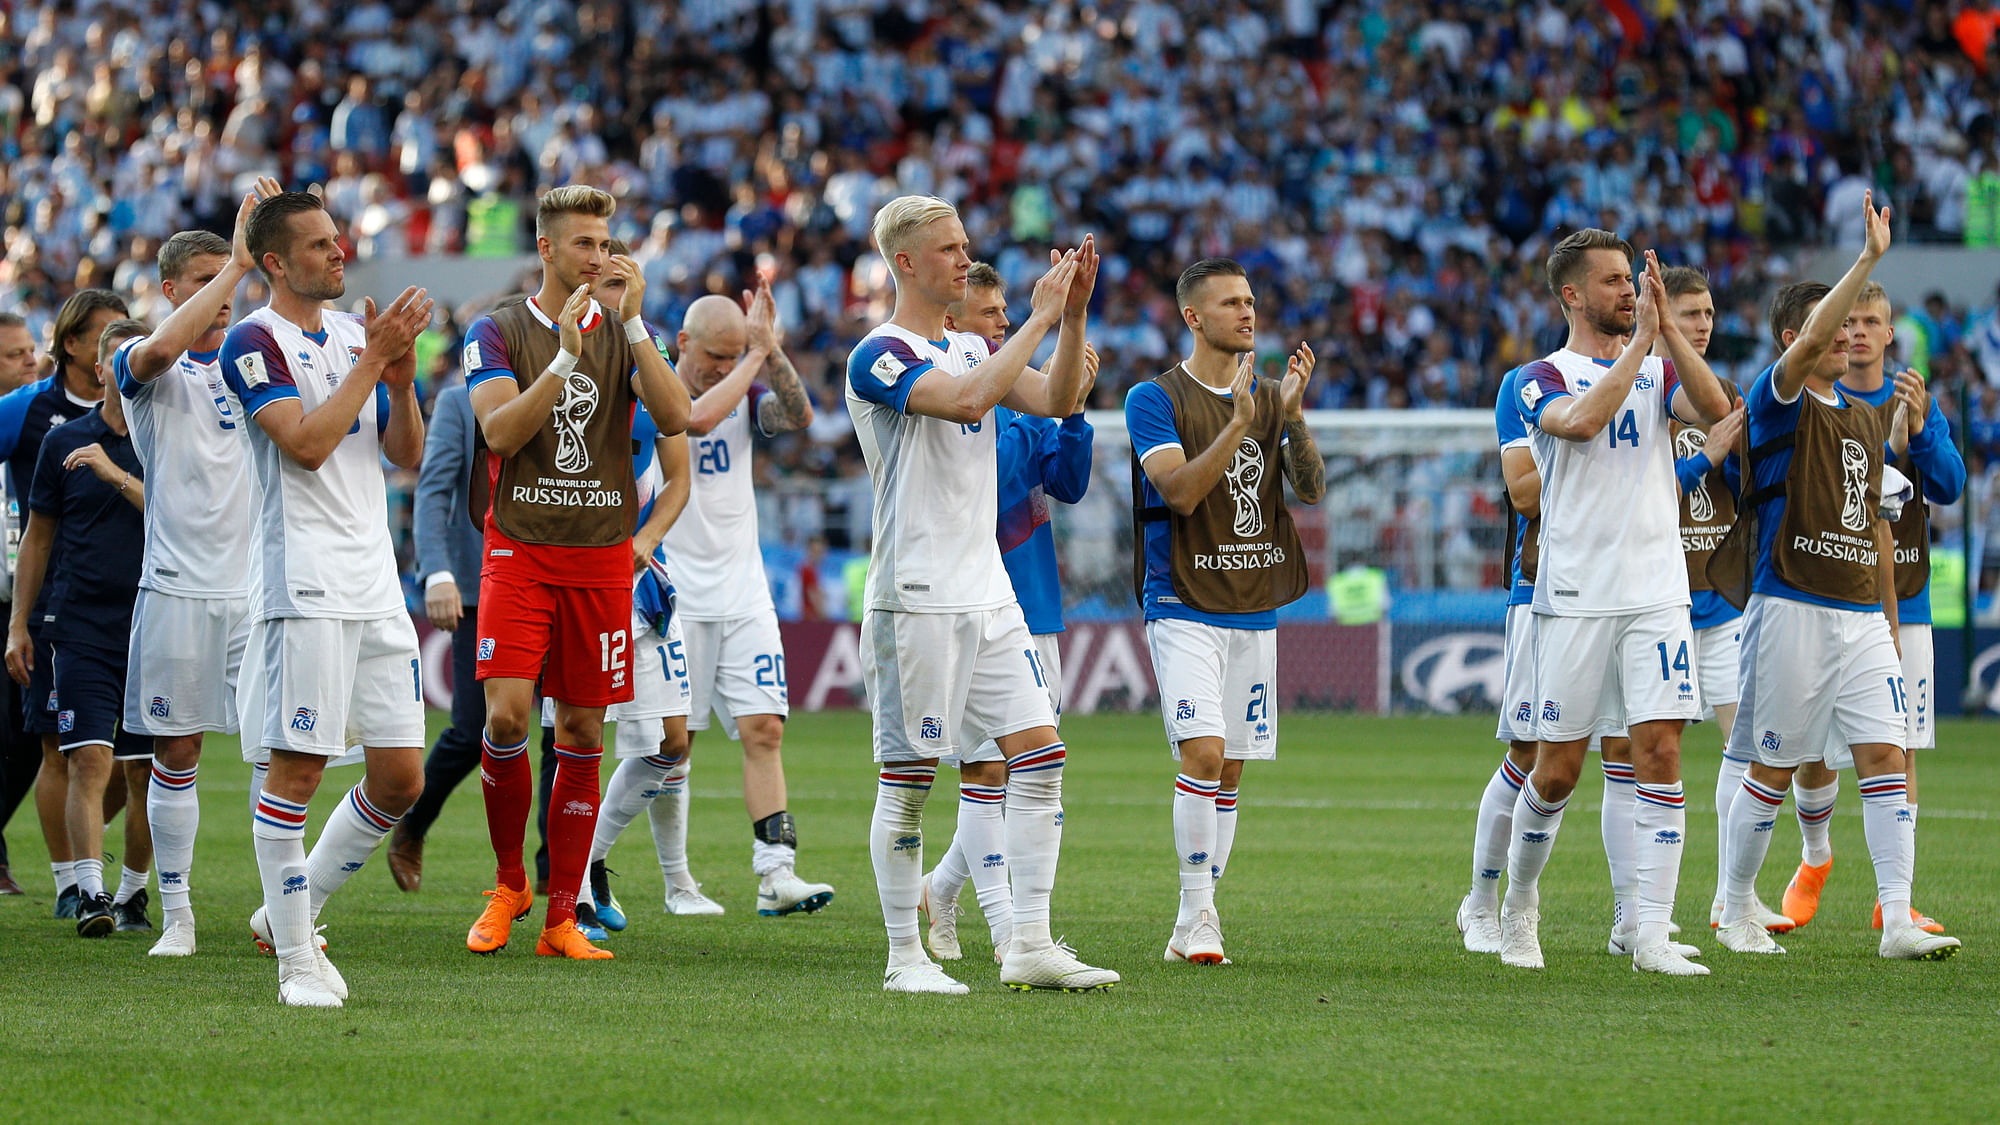 Iceland players applaud after their 1-1 draw against Argentina at the 2018 FIFA World Cup in the Spartak Stadium in Moscow, Russia, Saturday, June 16, 2018.